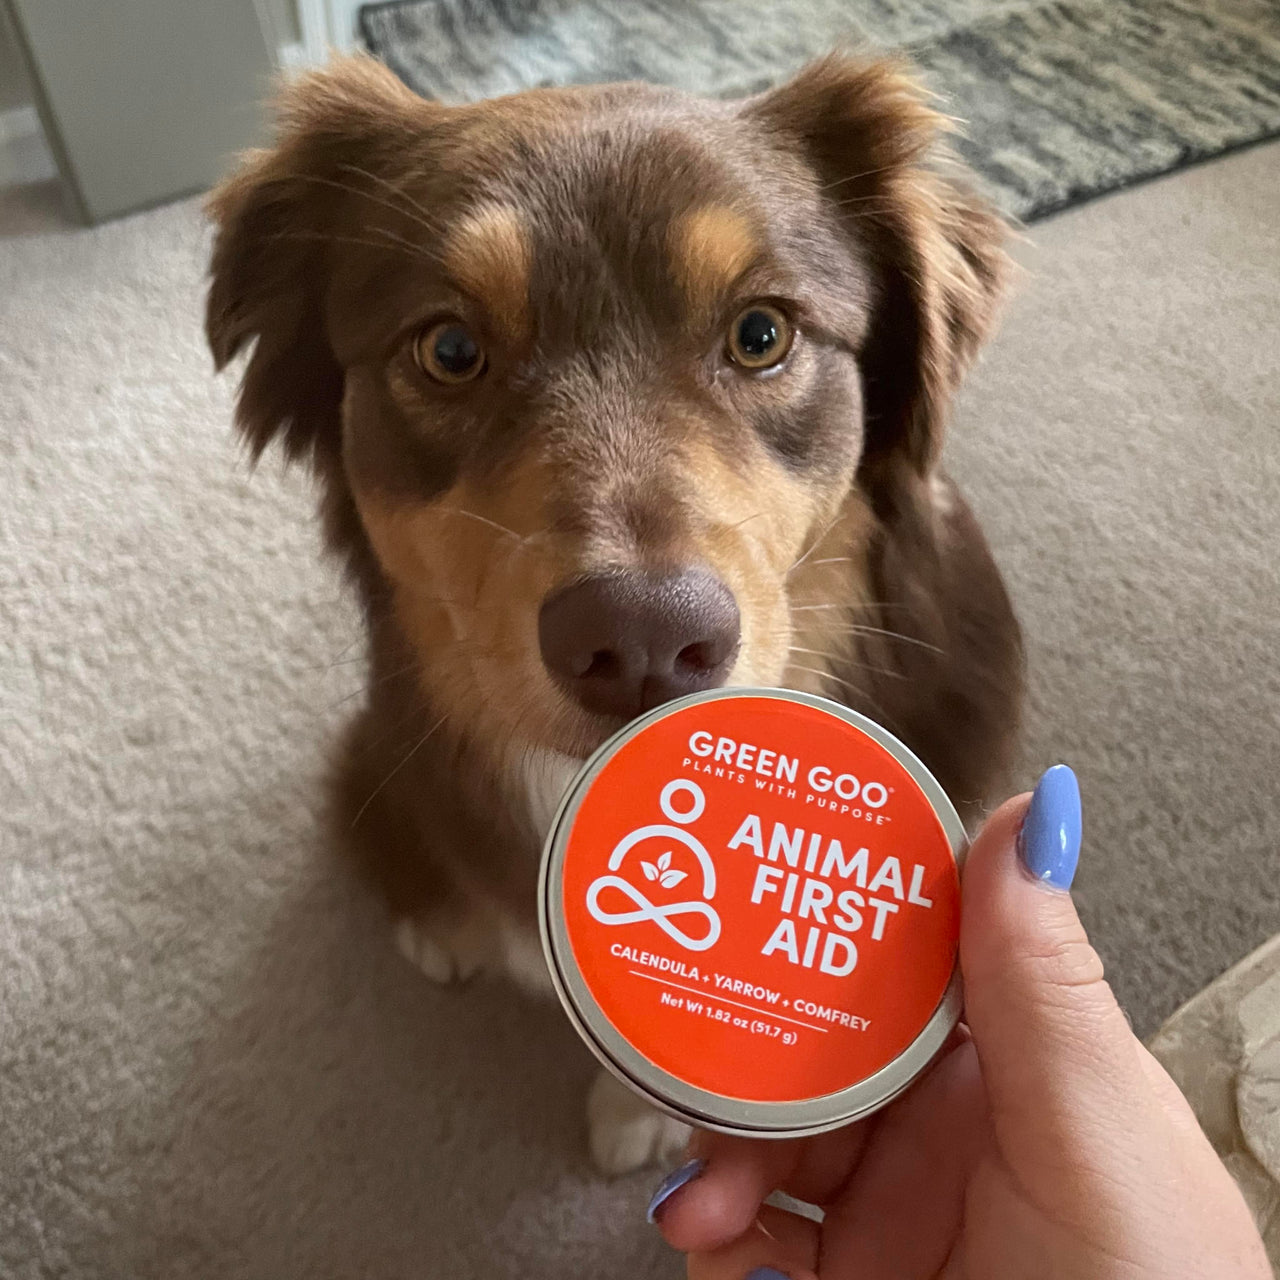 Green Goo's Animal First Aid salve tin is held in front of a sitting brown dog